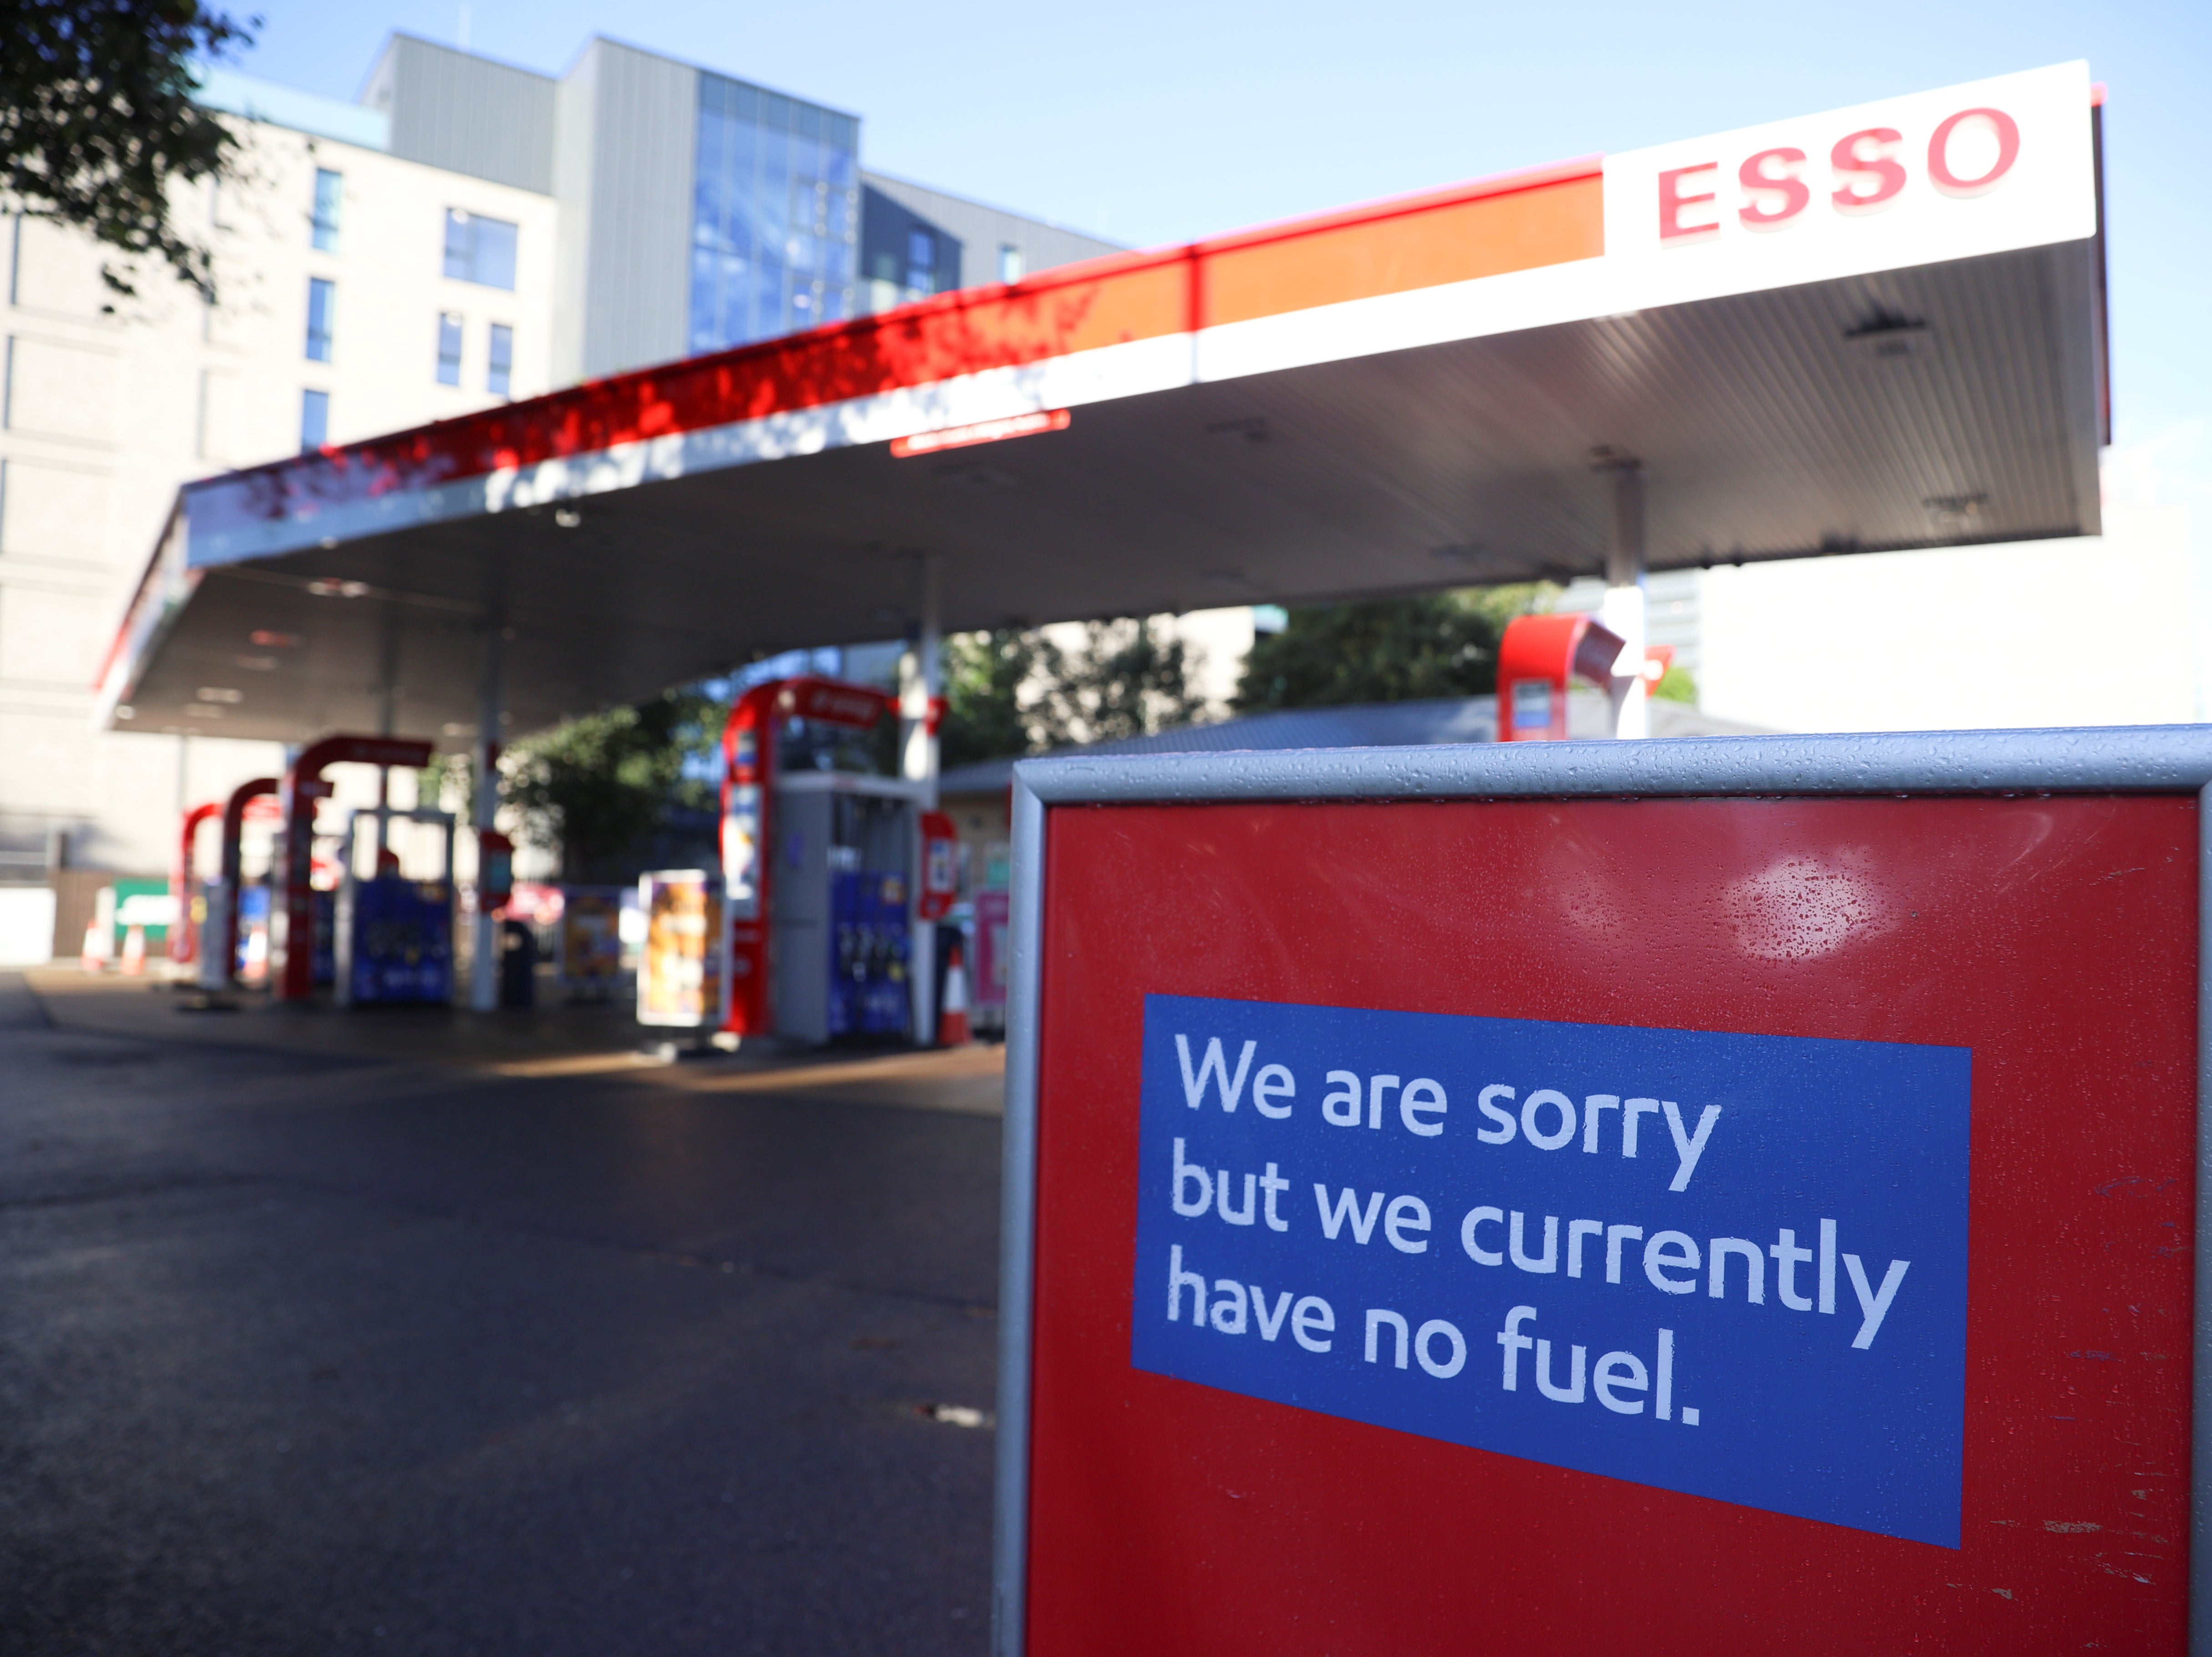 A sign informing customers that fuel has run out is pictured at a Esso fuel station in London